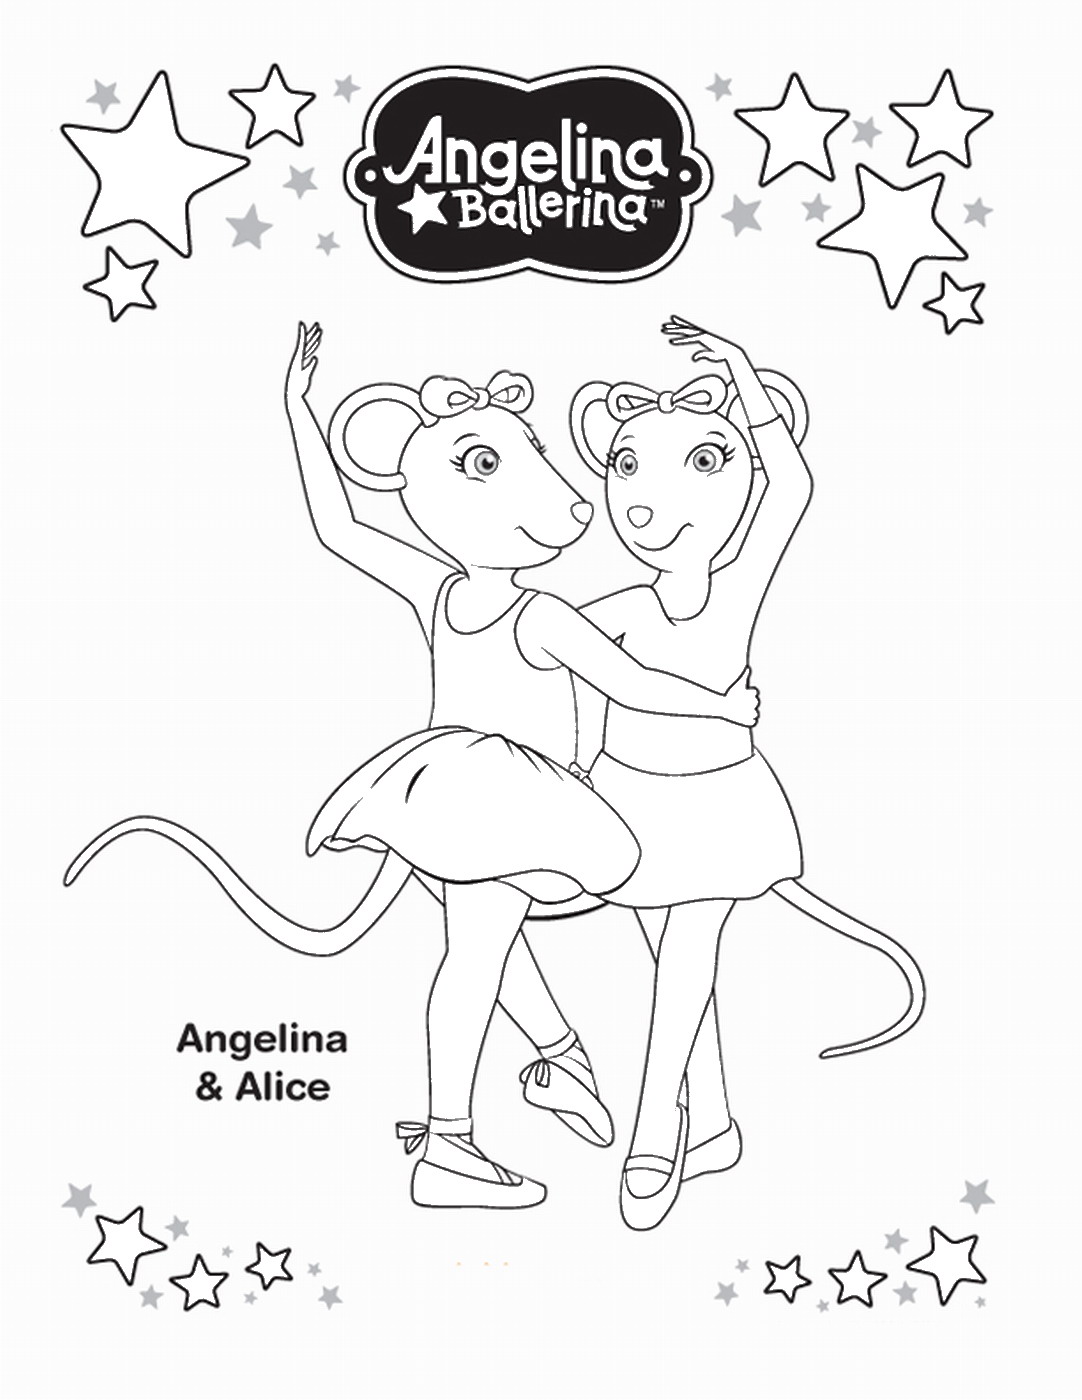 Printable Angelina Ballerina Coloring Pages Pdf - Angelina Ballerina Coloring Sheet